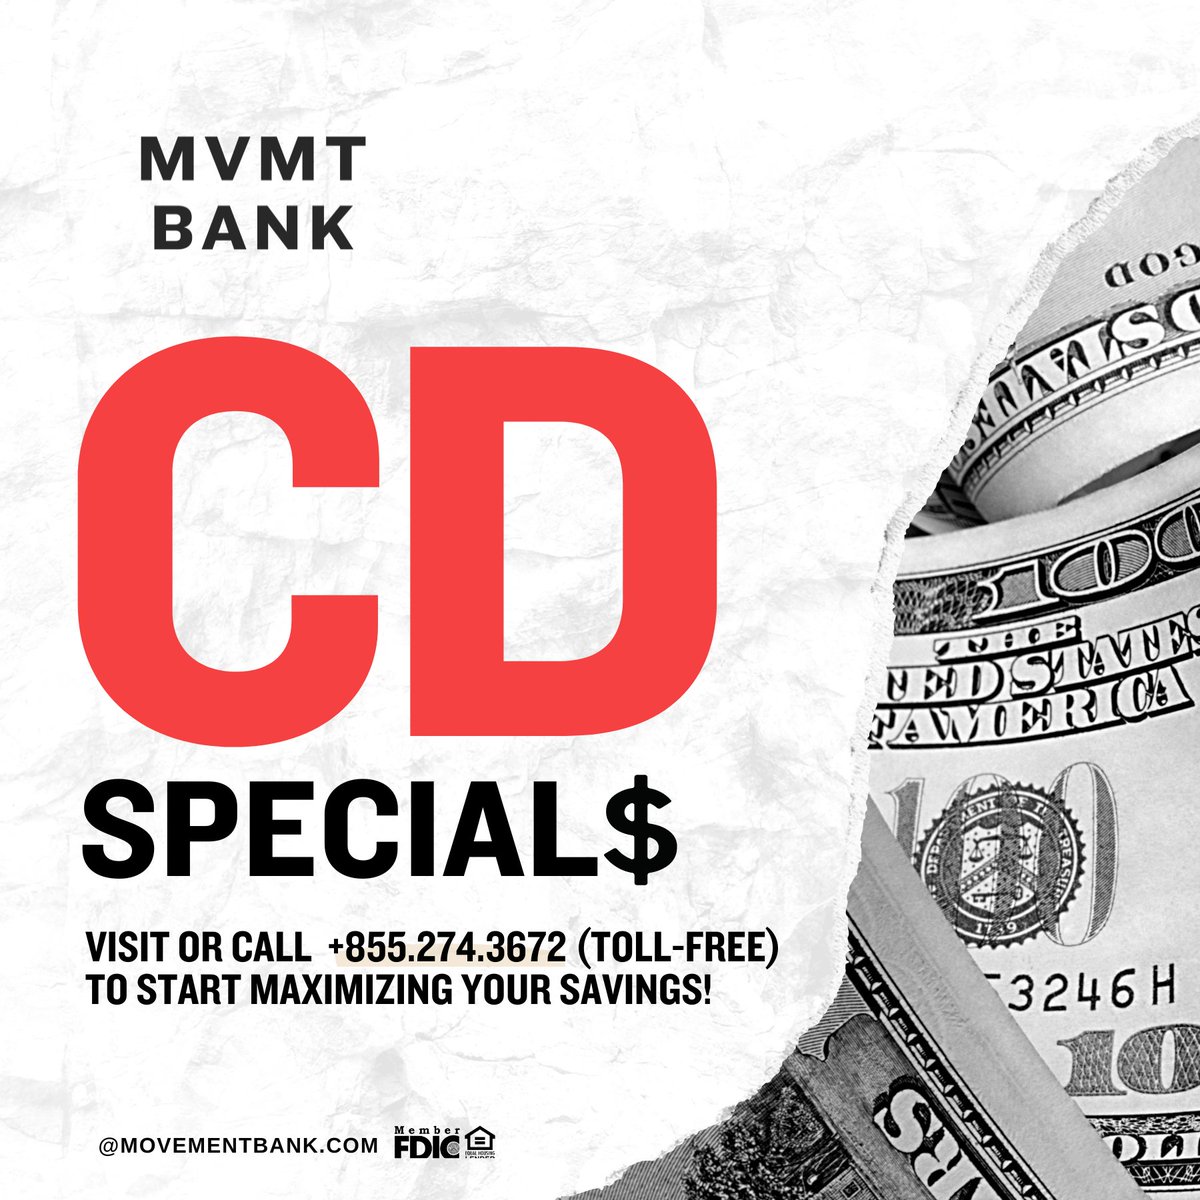 Lock in a guaranteed return on your investment when you take advantage of any of our Spring CD specials! Visit a branch near you or call us toll-free at 855-274-3672 to start maximizing your savings!

#MovementBankl #Savings #Investing #FinancialGoals  #FinancialWealth